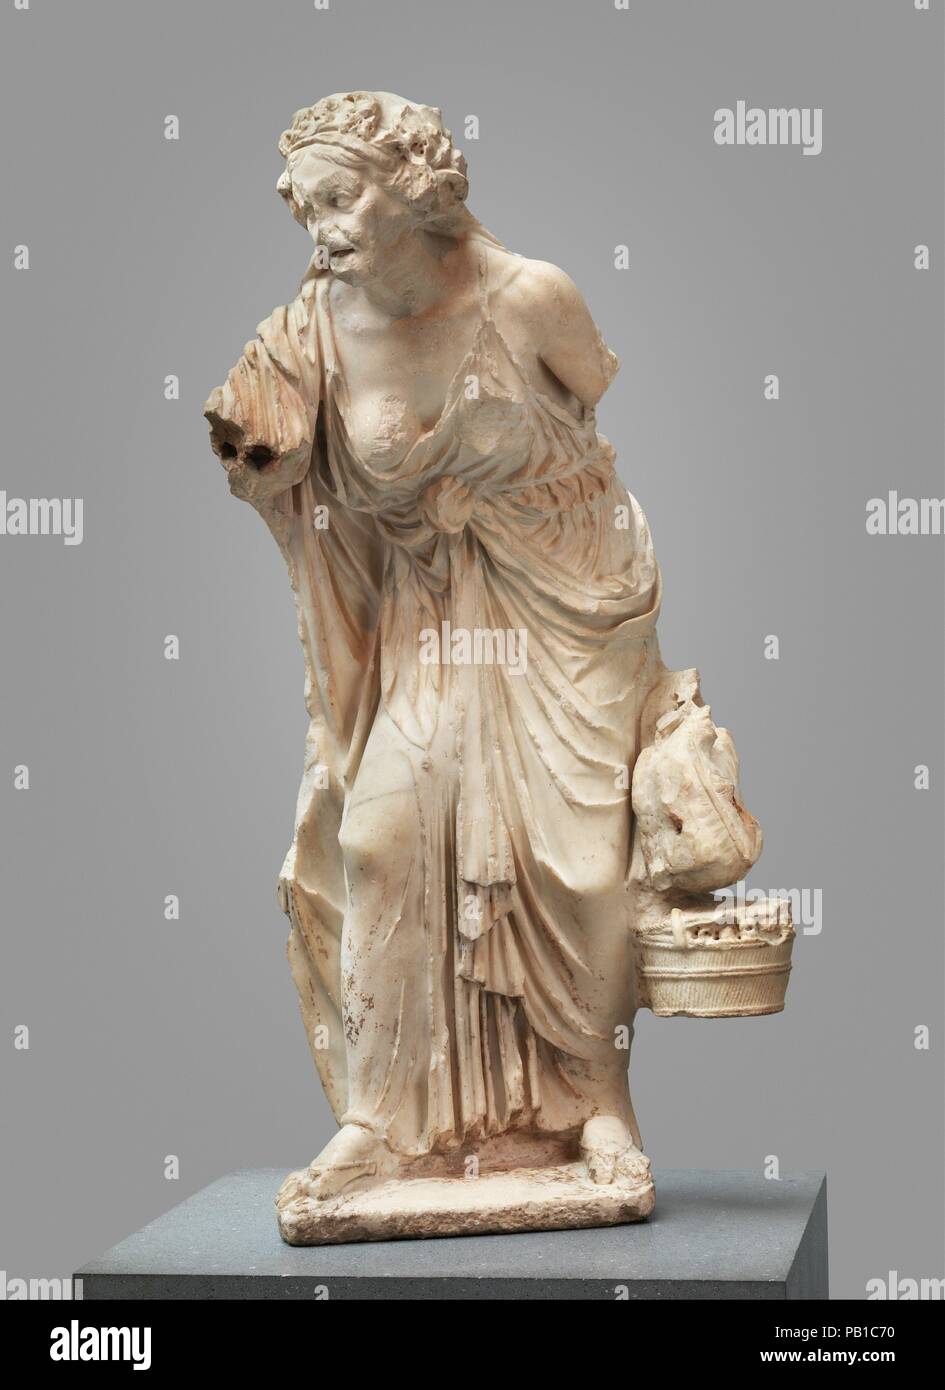 Marble statue of an old woman. Culture: Roman. Dimensions: H. 49 5/8 in. (125.98 cm). Date: A.D. 14-68.  Copy of a Greek work of the second century B.C.  During the Hellenistic period, artists became concerned with the accurate representation of childhood, old age, and even physical deformity. The range of subject matter was extended to include genre-like figures from the fringes of society. Fine, large-scale statues of fishermen, peasants, and aged courtesans became valued religious dedications, sometimes placed in a park-like setting within the  sanctuary of the god. Although this statue is  Stock Photo